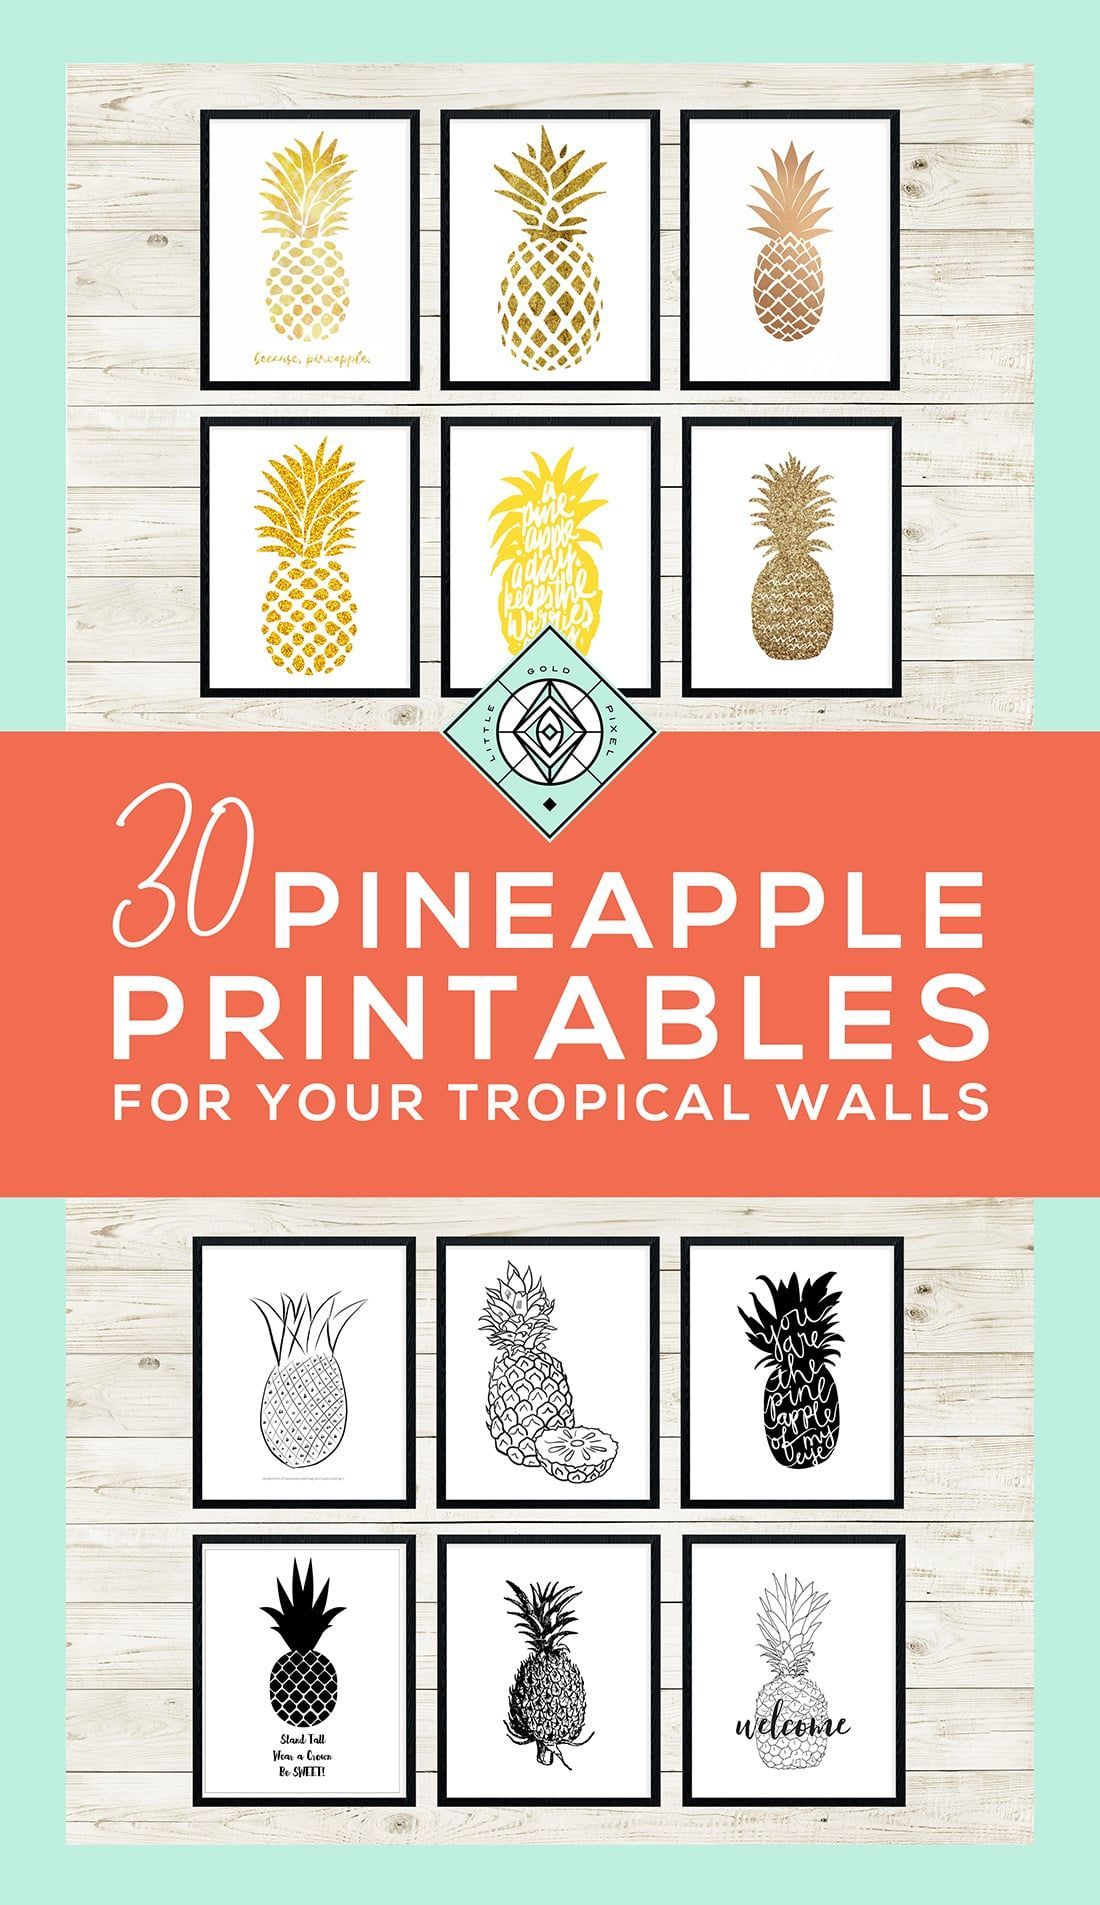 Free Pineapple Printables • Amazing Roundup • Little Gold Pixel -   21 diy projects Free wall art ideas